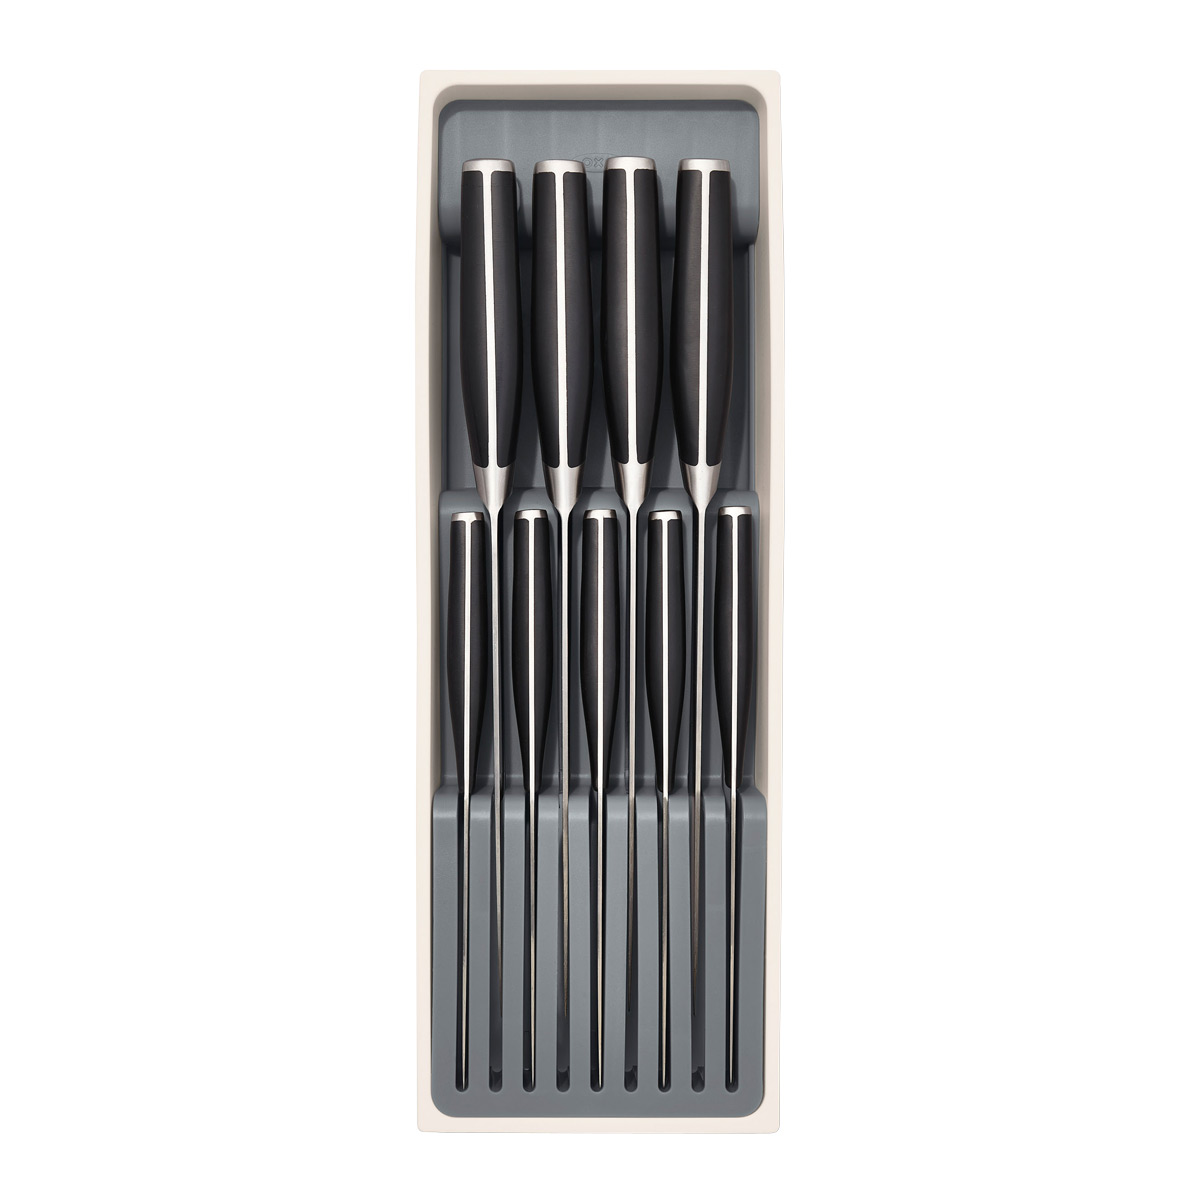 OXO Good Grips Hold Anything Drawer Organizer - KnifeCenter - OXO1335700 -  Discontinued